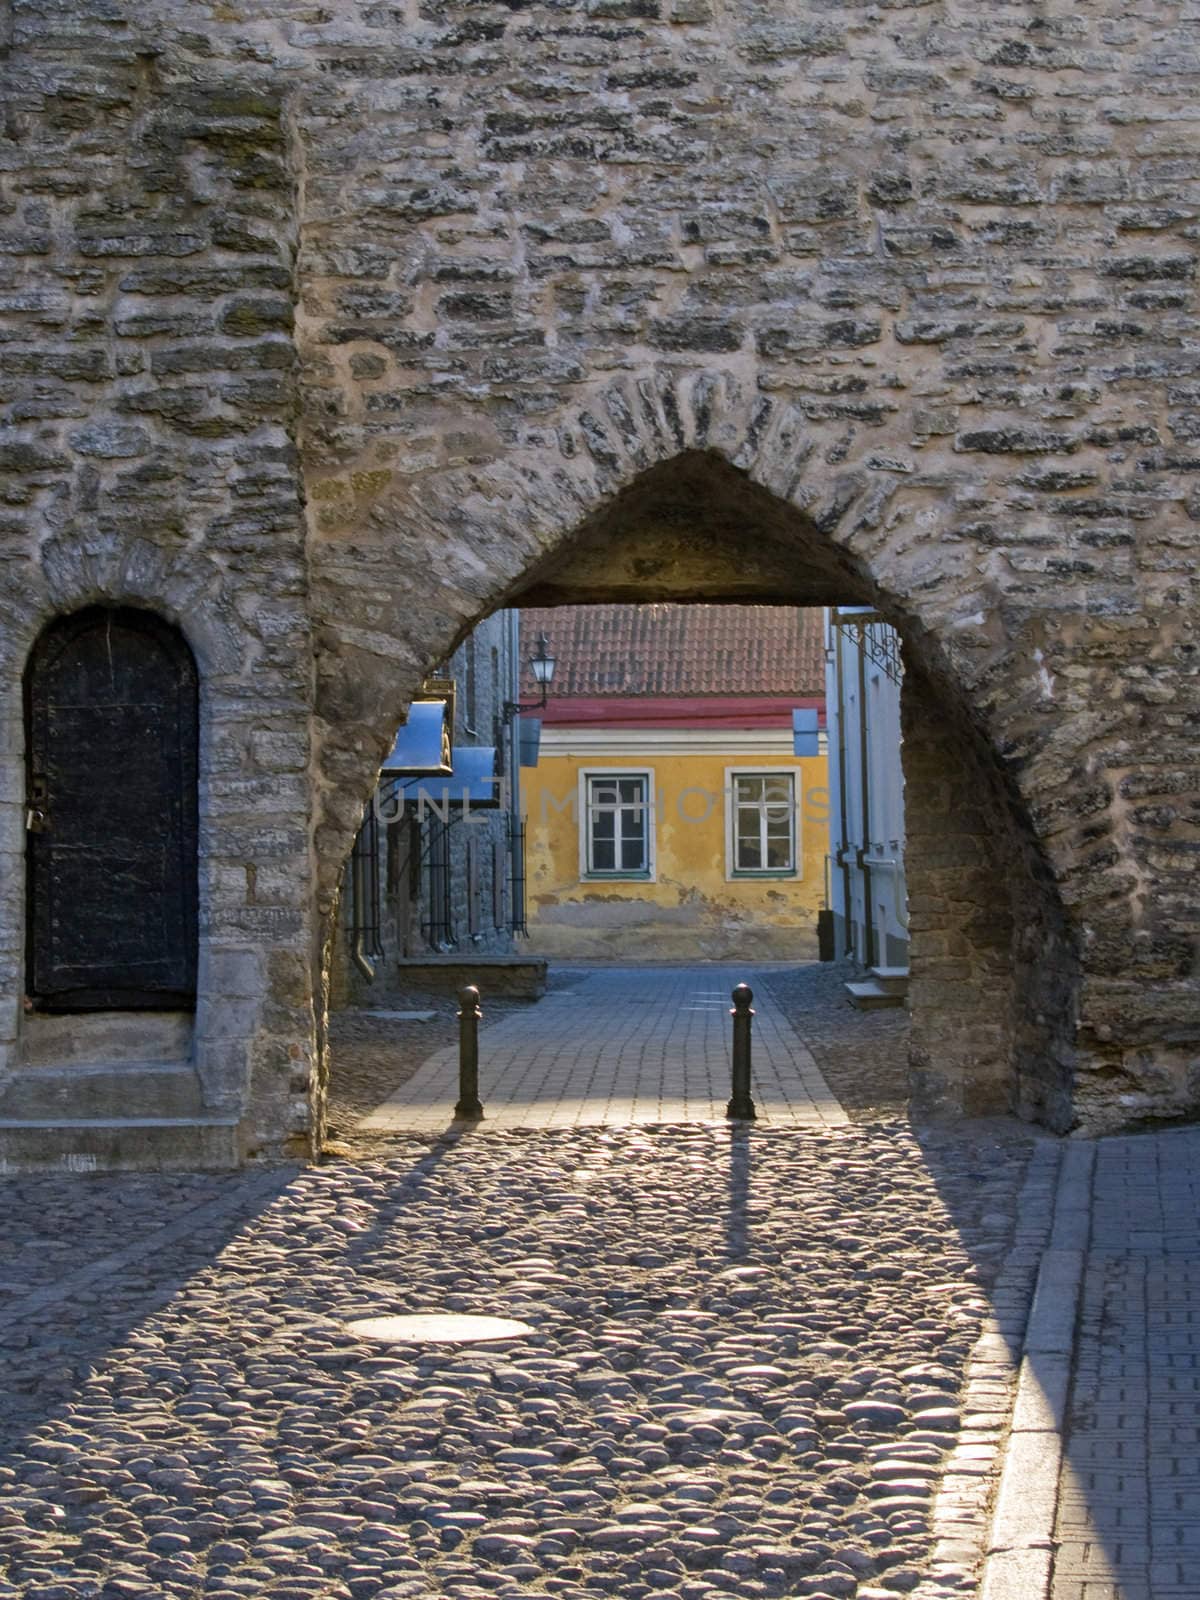 Medieval Fortification  and towers in capital of Estonia Tallinn by lem